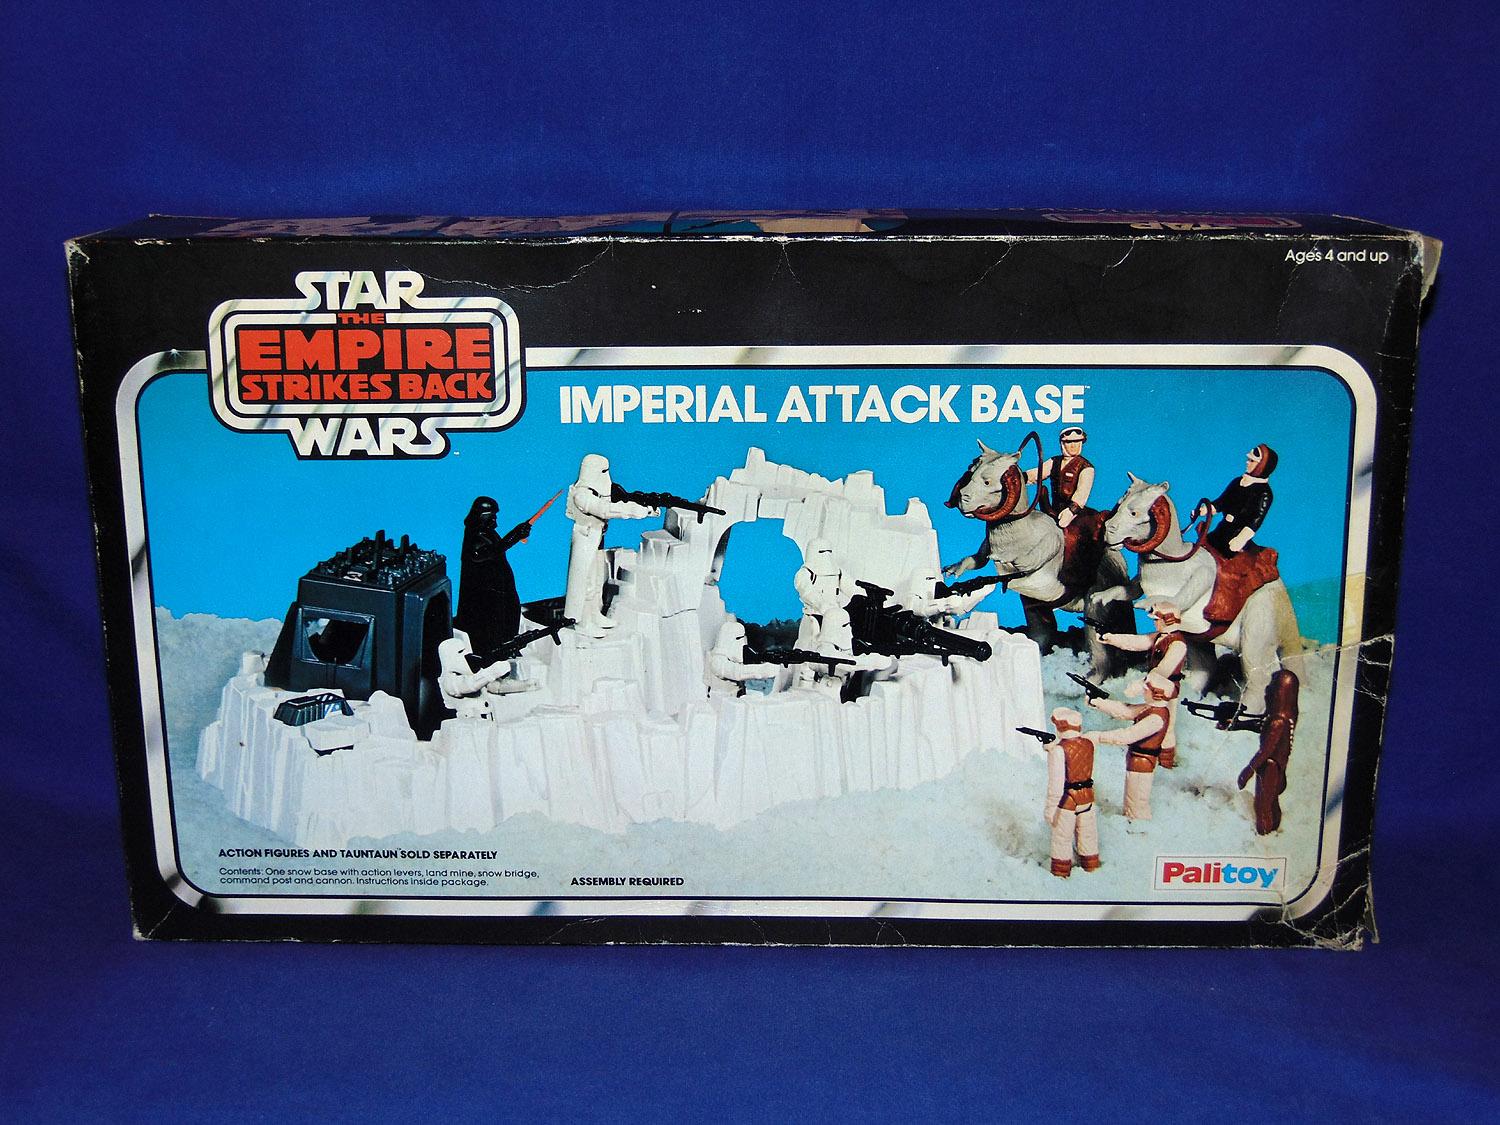 Palitoy Imperial Attack Base - 03.jpg